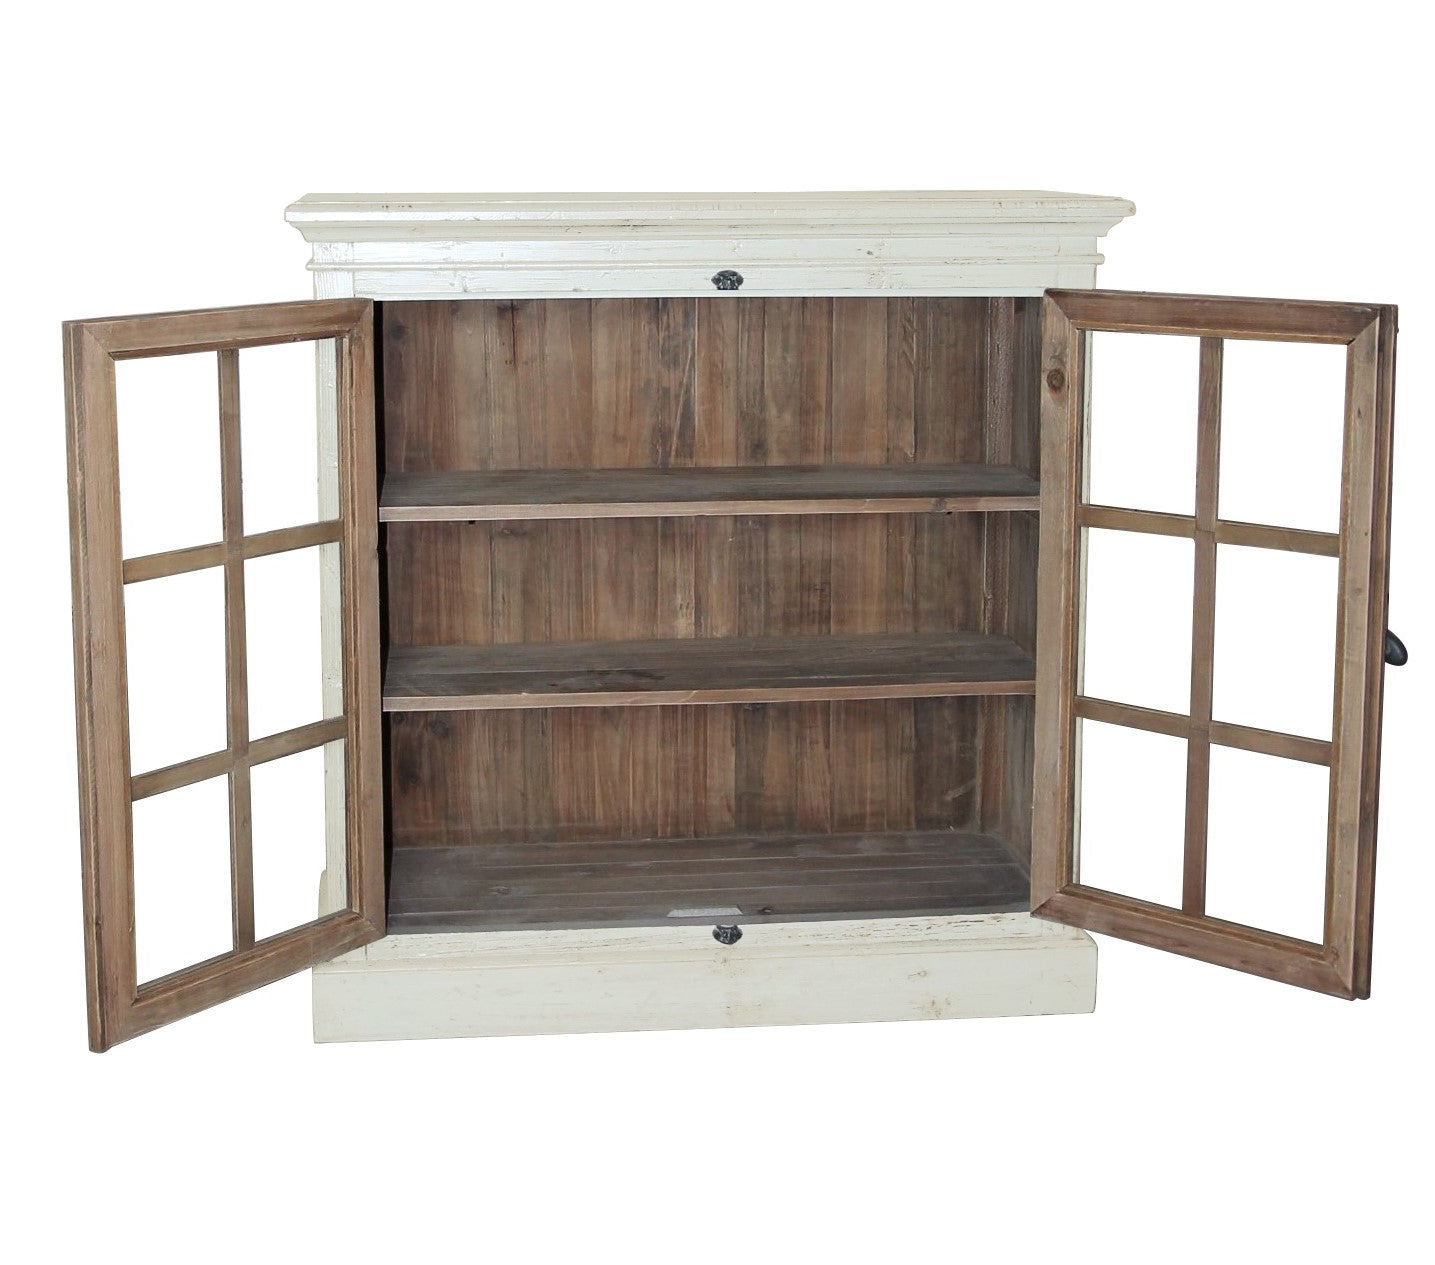 Mallory Accent Cabinet, gray/natural